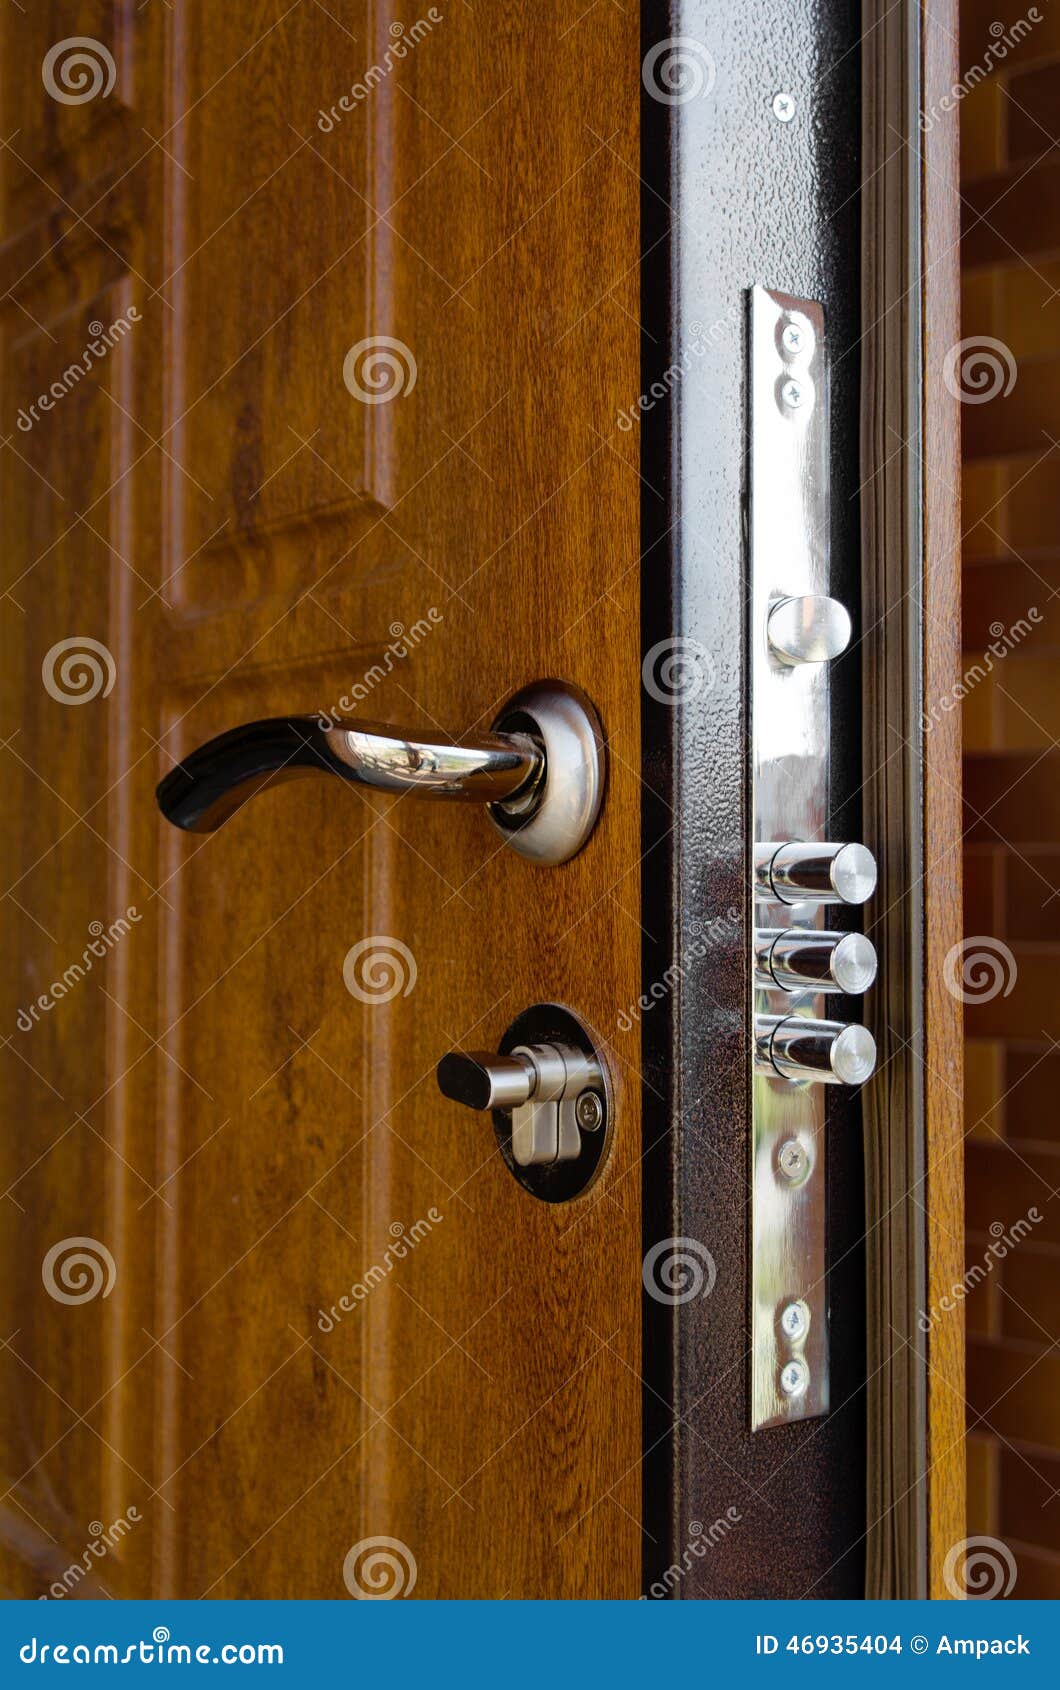 triple cylinders new high security lock installed wooden front door to home locks extended 46935404